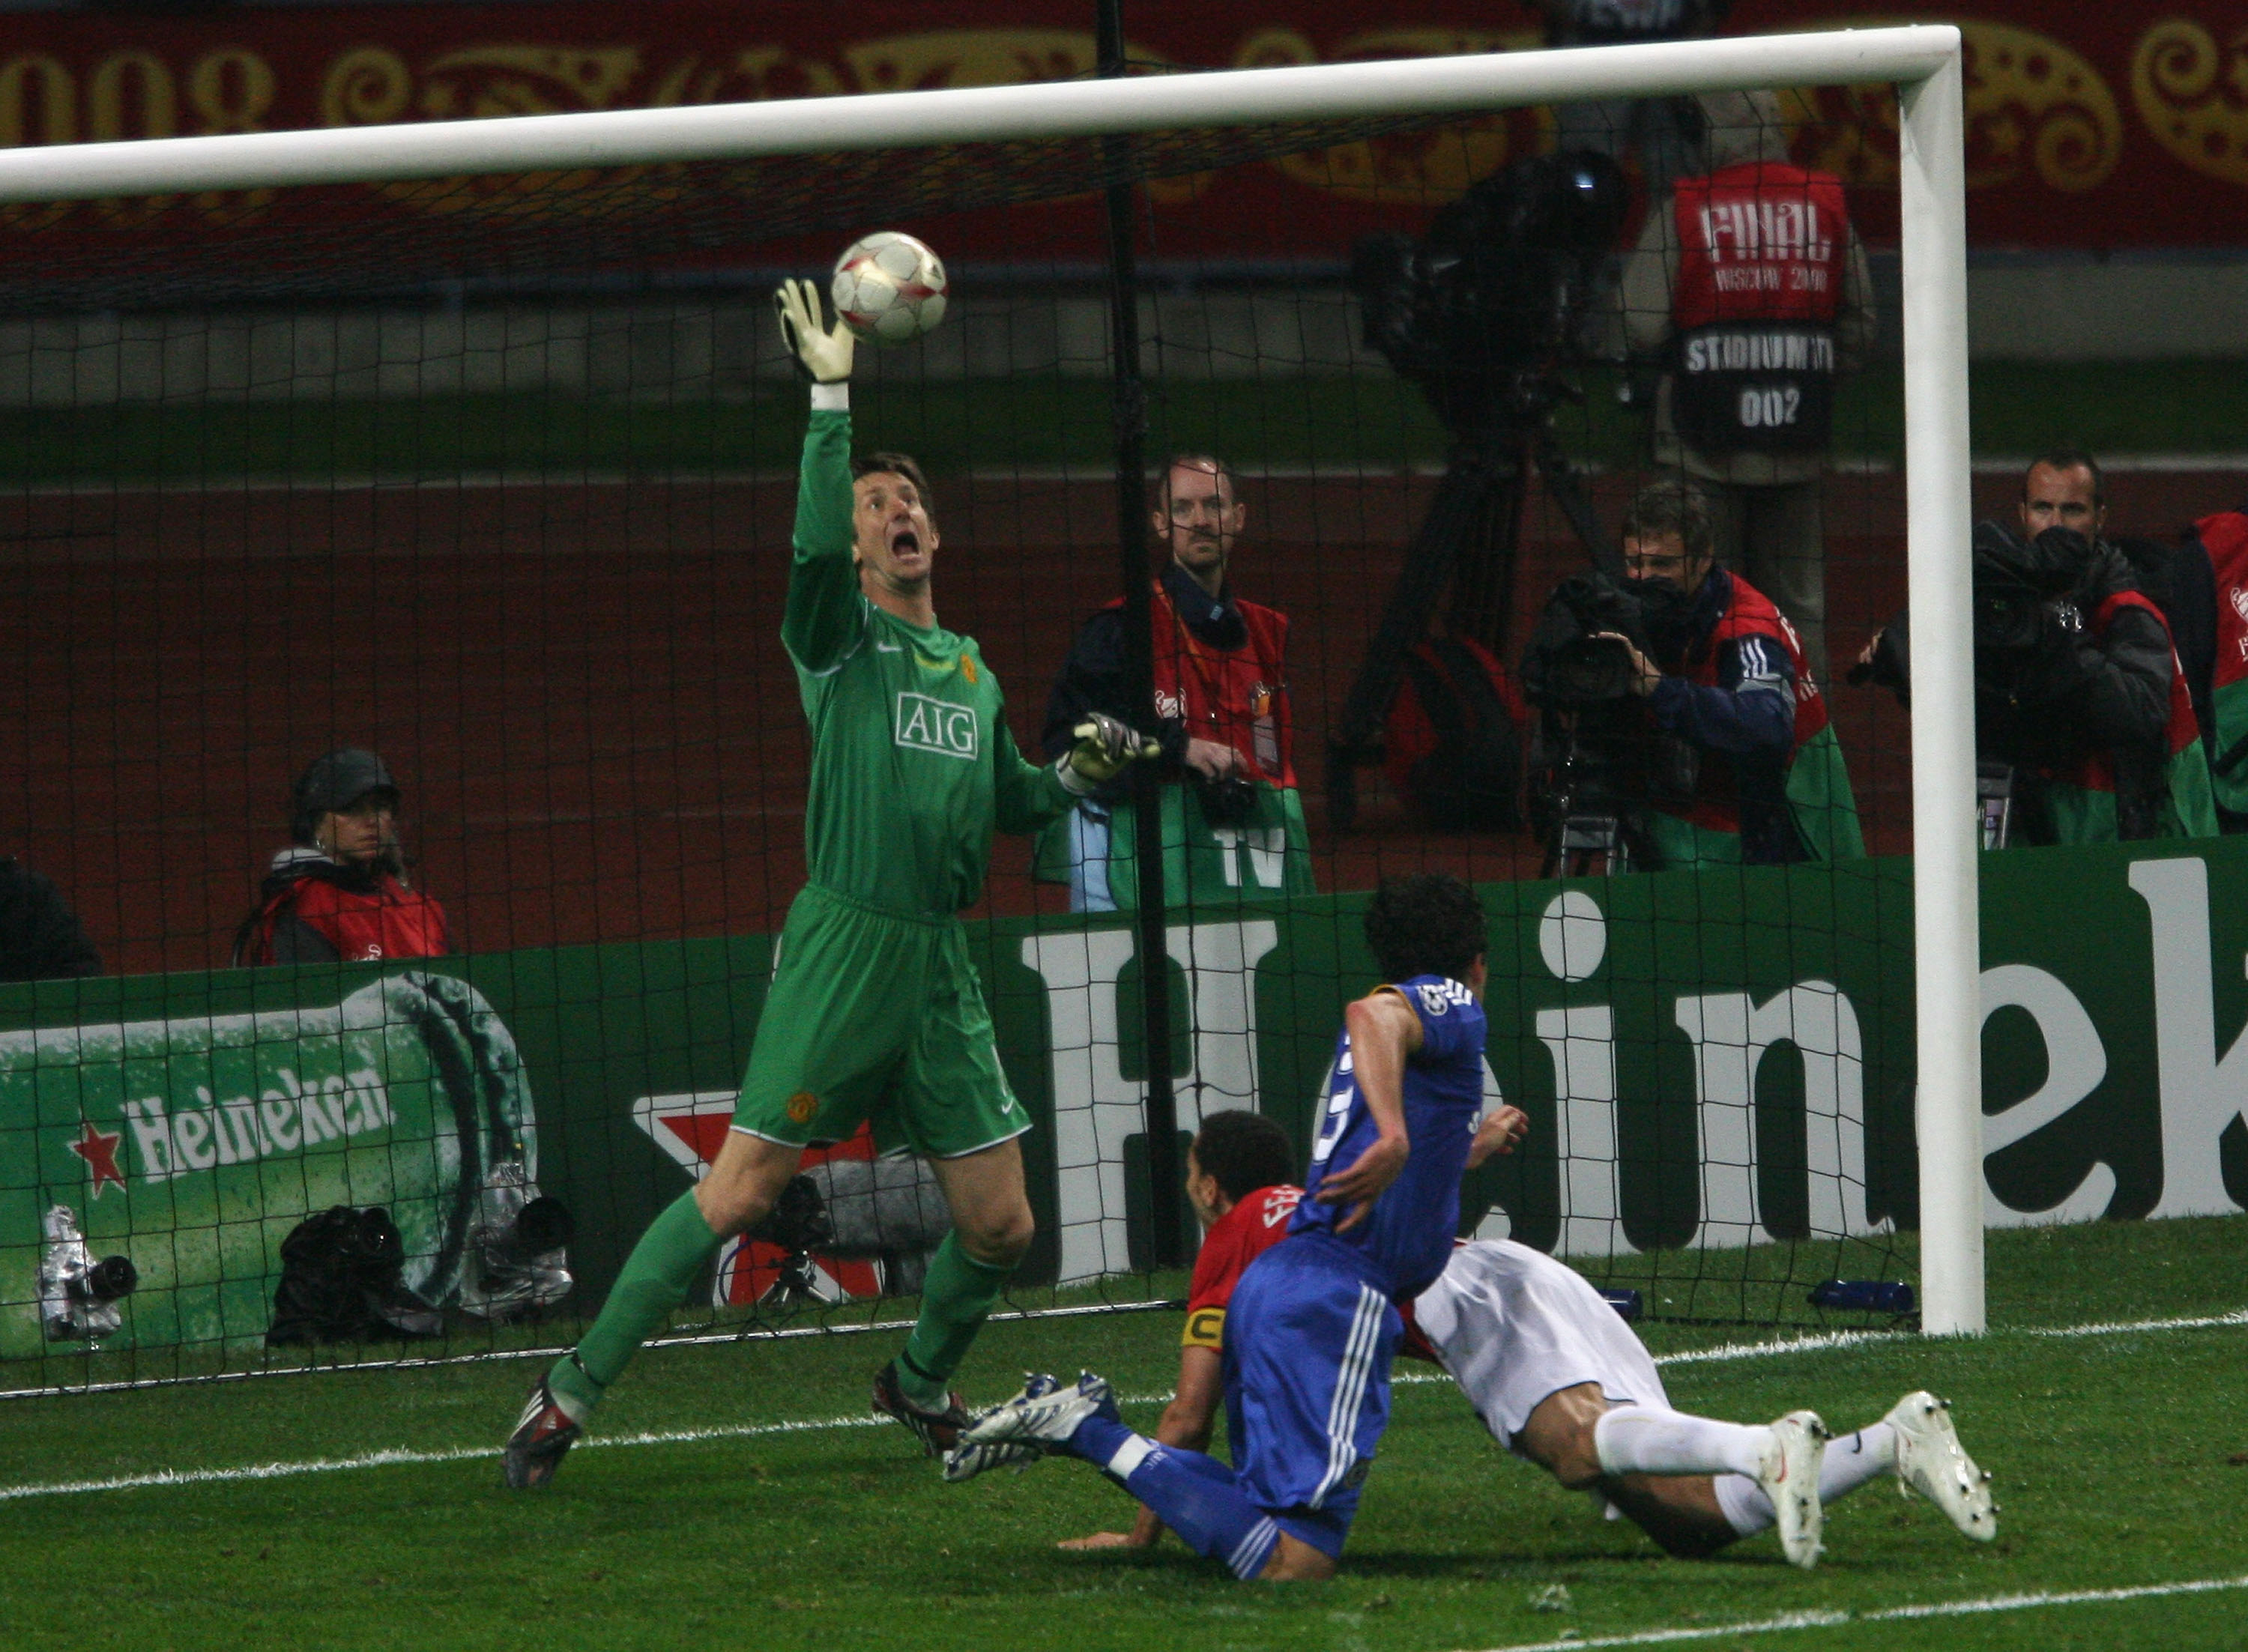 MOSCOW - MAY 21:  Edwin Van der Sar of Manchester United saves the attempt on goal by Michael Ballack of Chelsea during the UEFA Champions League Final match between Manchester United and Chelsea at the Luzhniki Stadium on May 21, 2008 in Moscow, Russia.